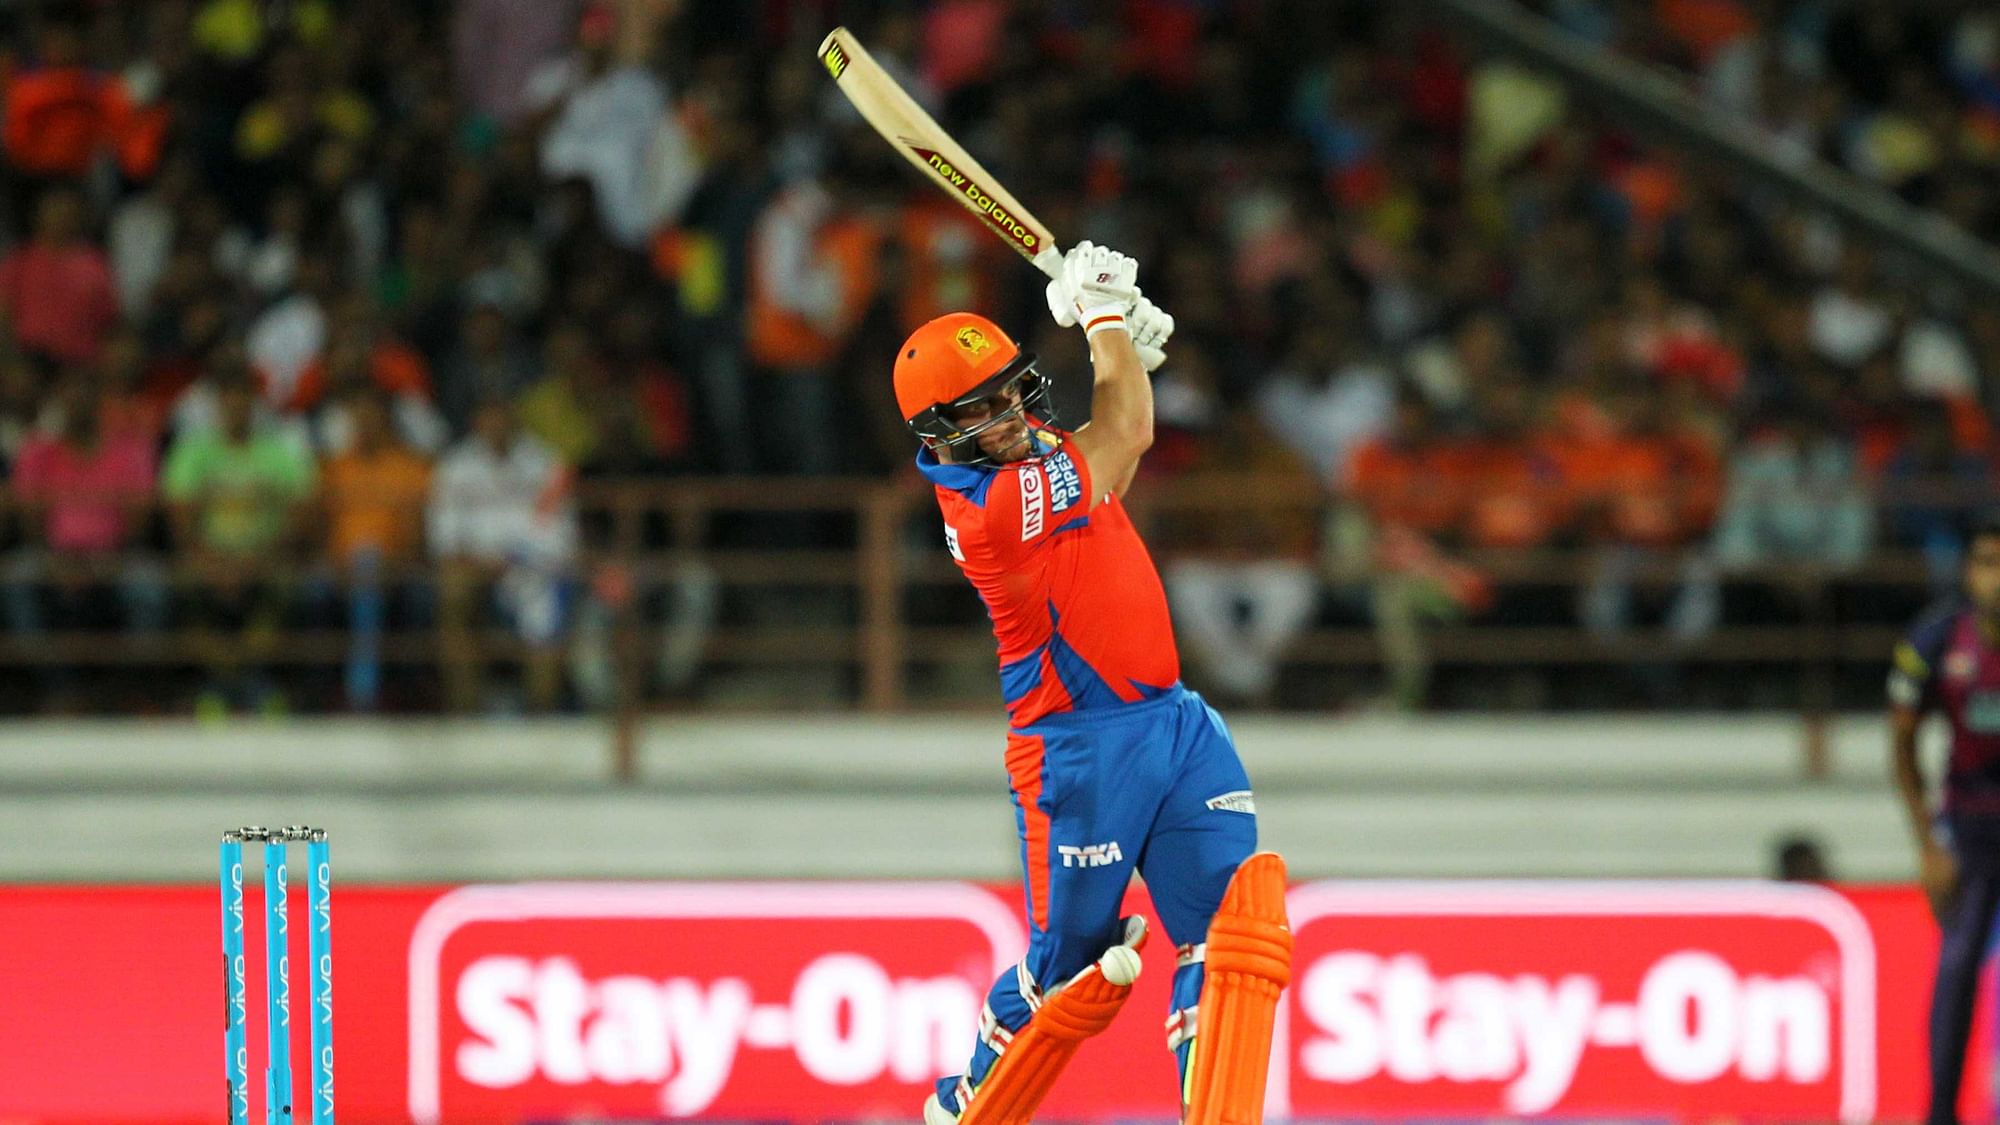 Aaron Finch scored 50 of 33 balls to give GL a blazing start (Photo: BCCI)